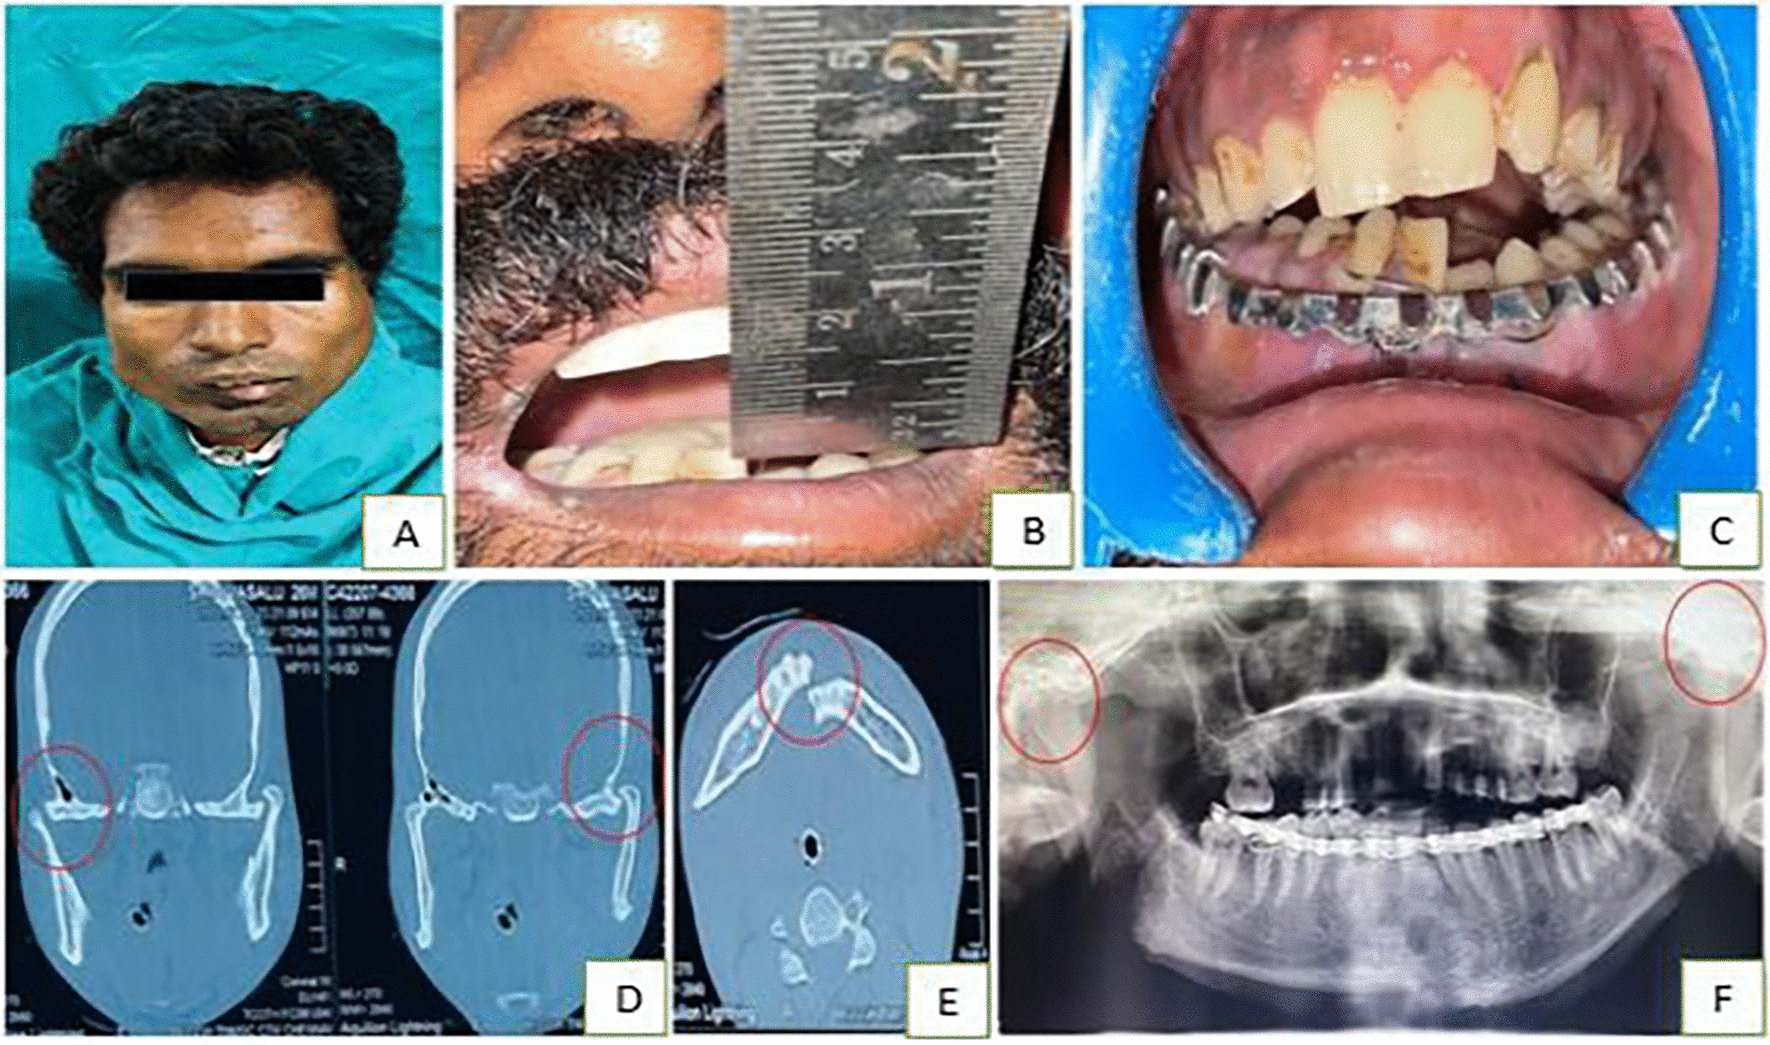 Bilateral Superolateral Dislocation of Intact Mandibular Condyle with Concomitant Symphysis Fracture: A Case Report